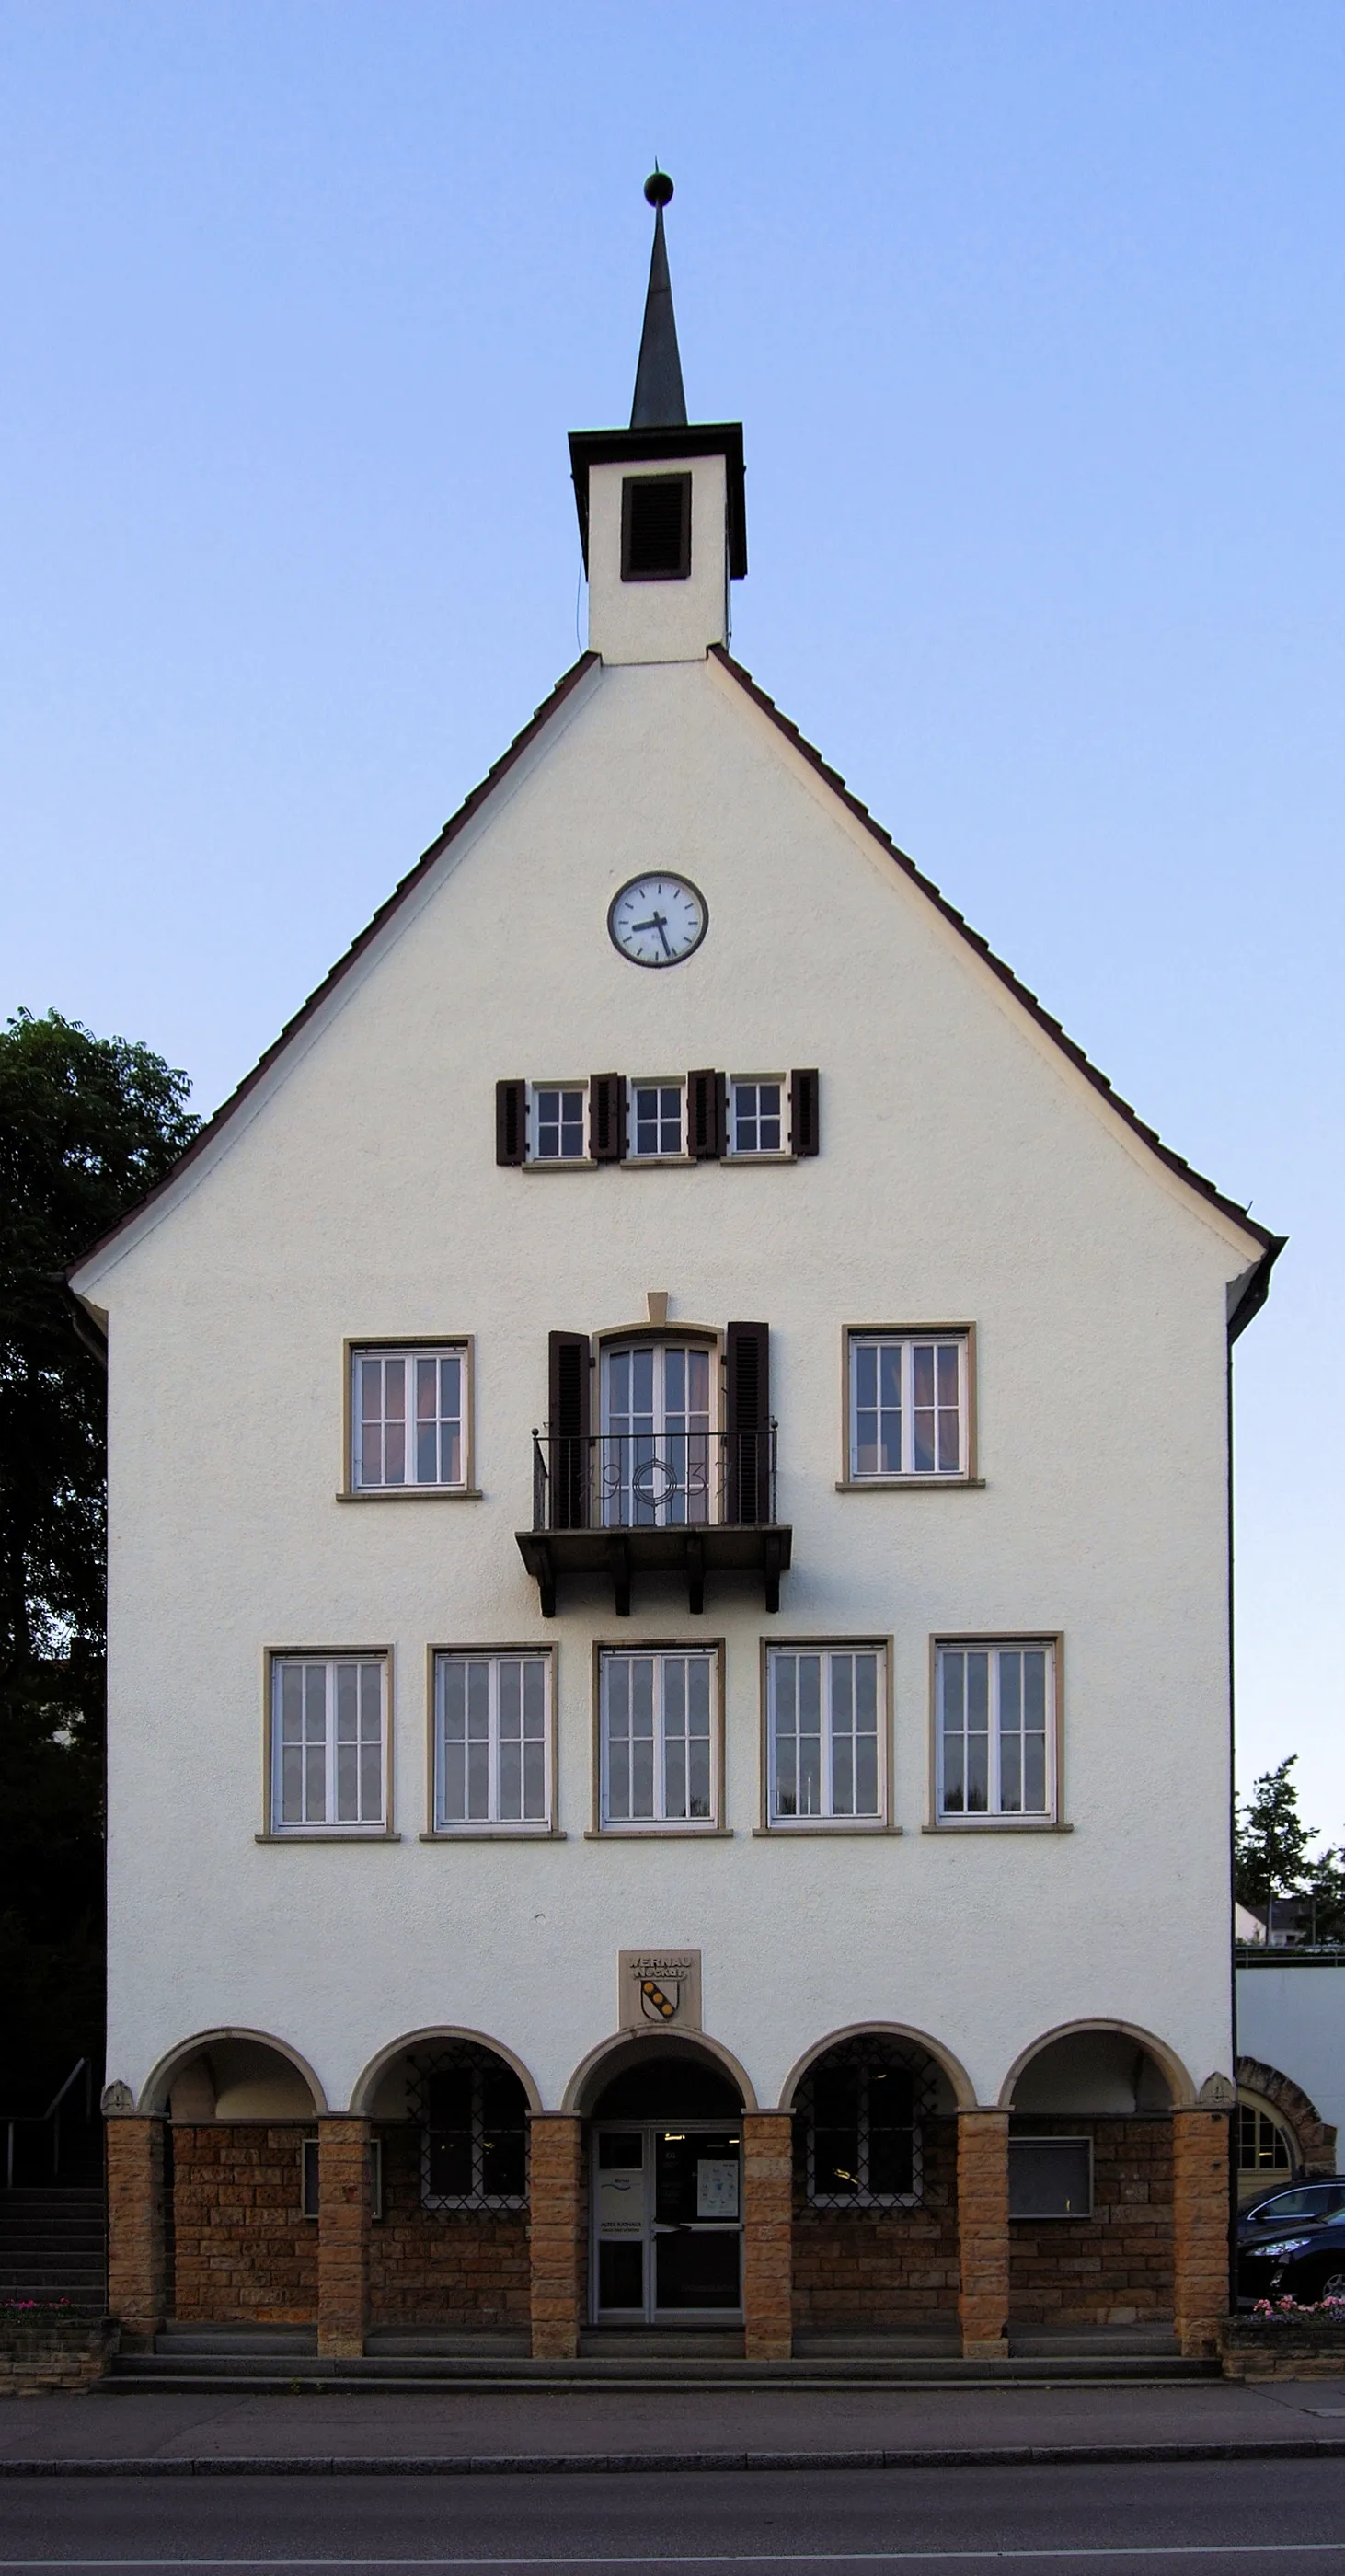 Photo showing: The old town hall of Wernau/Neckar, Baden-Württemberg. Picture taken in the evening.